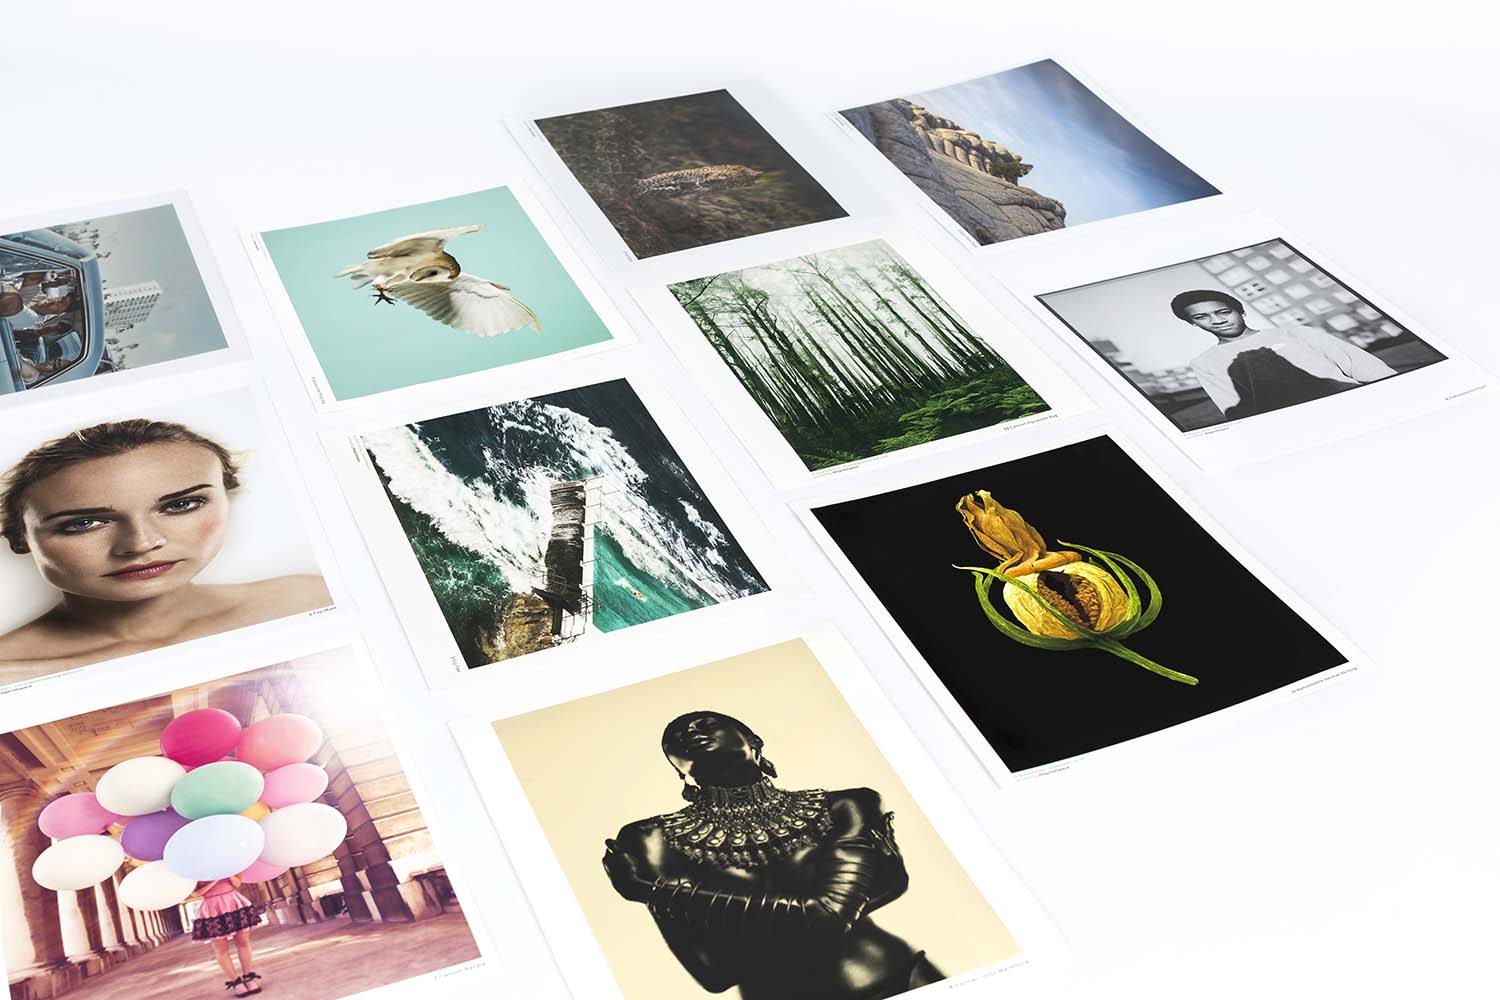 How to Choose the Best Photo Paper for Inkjet Printer 